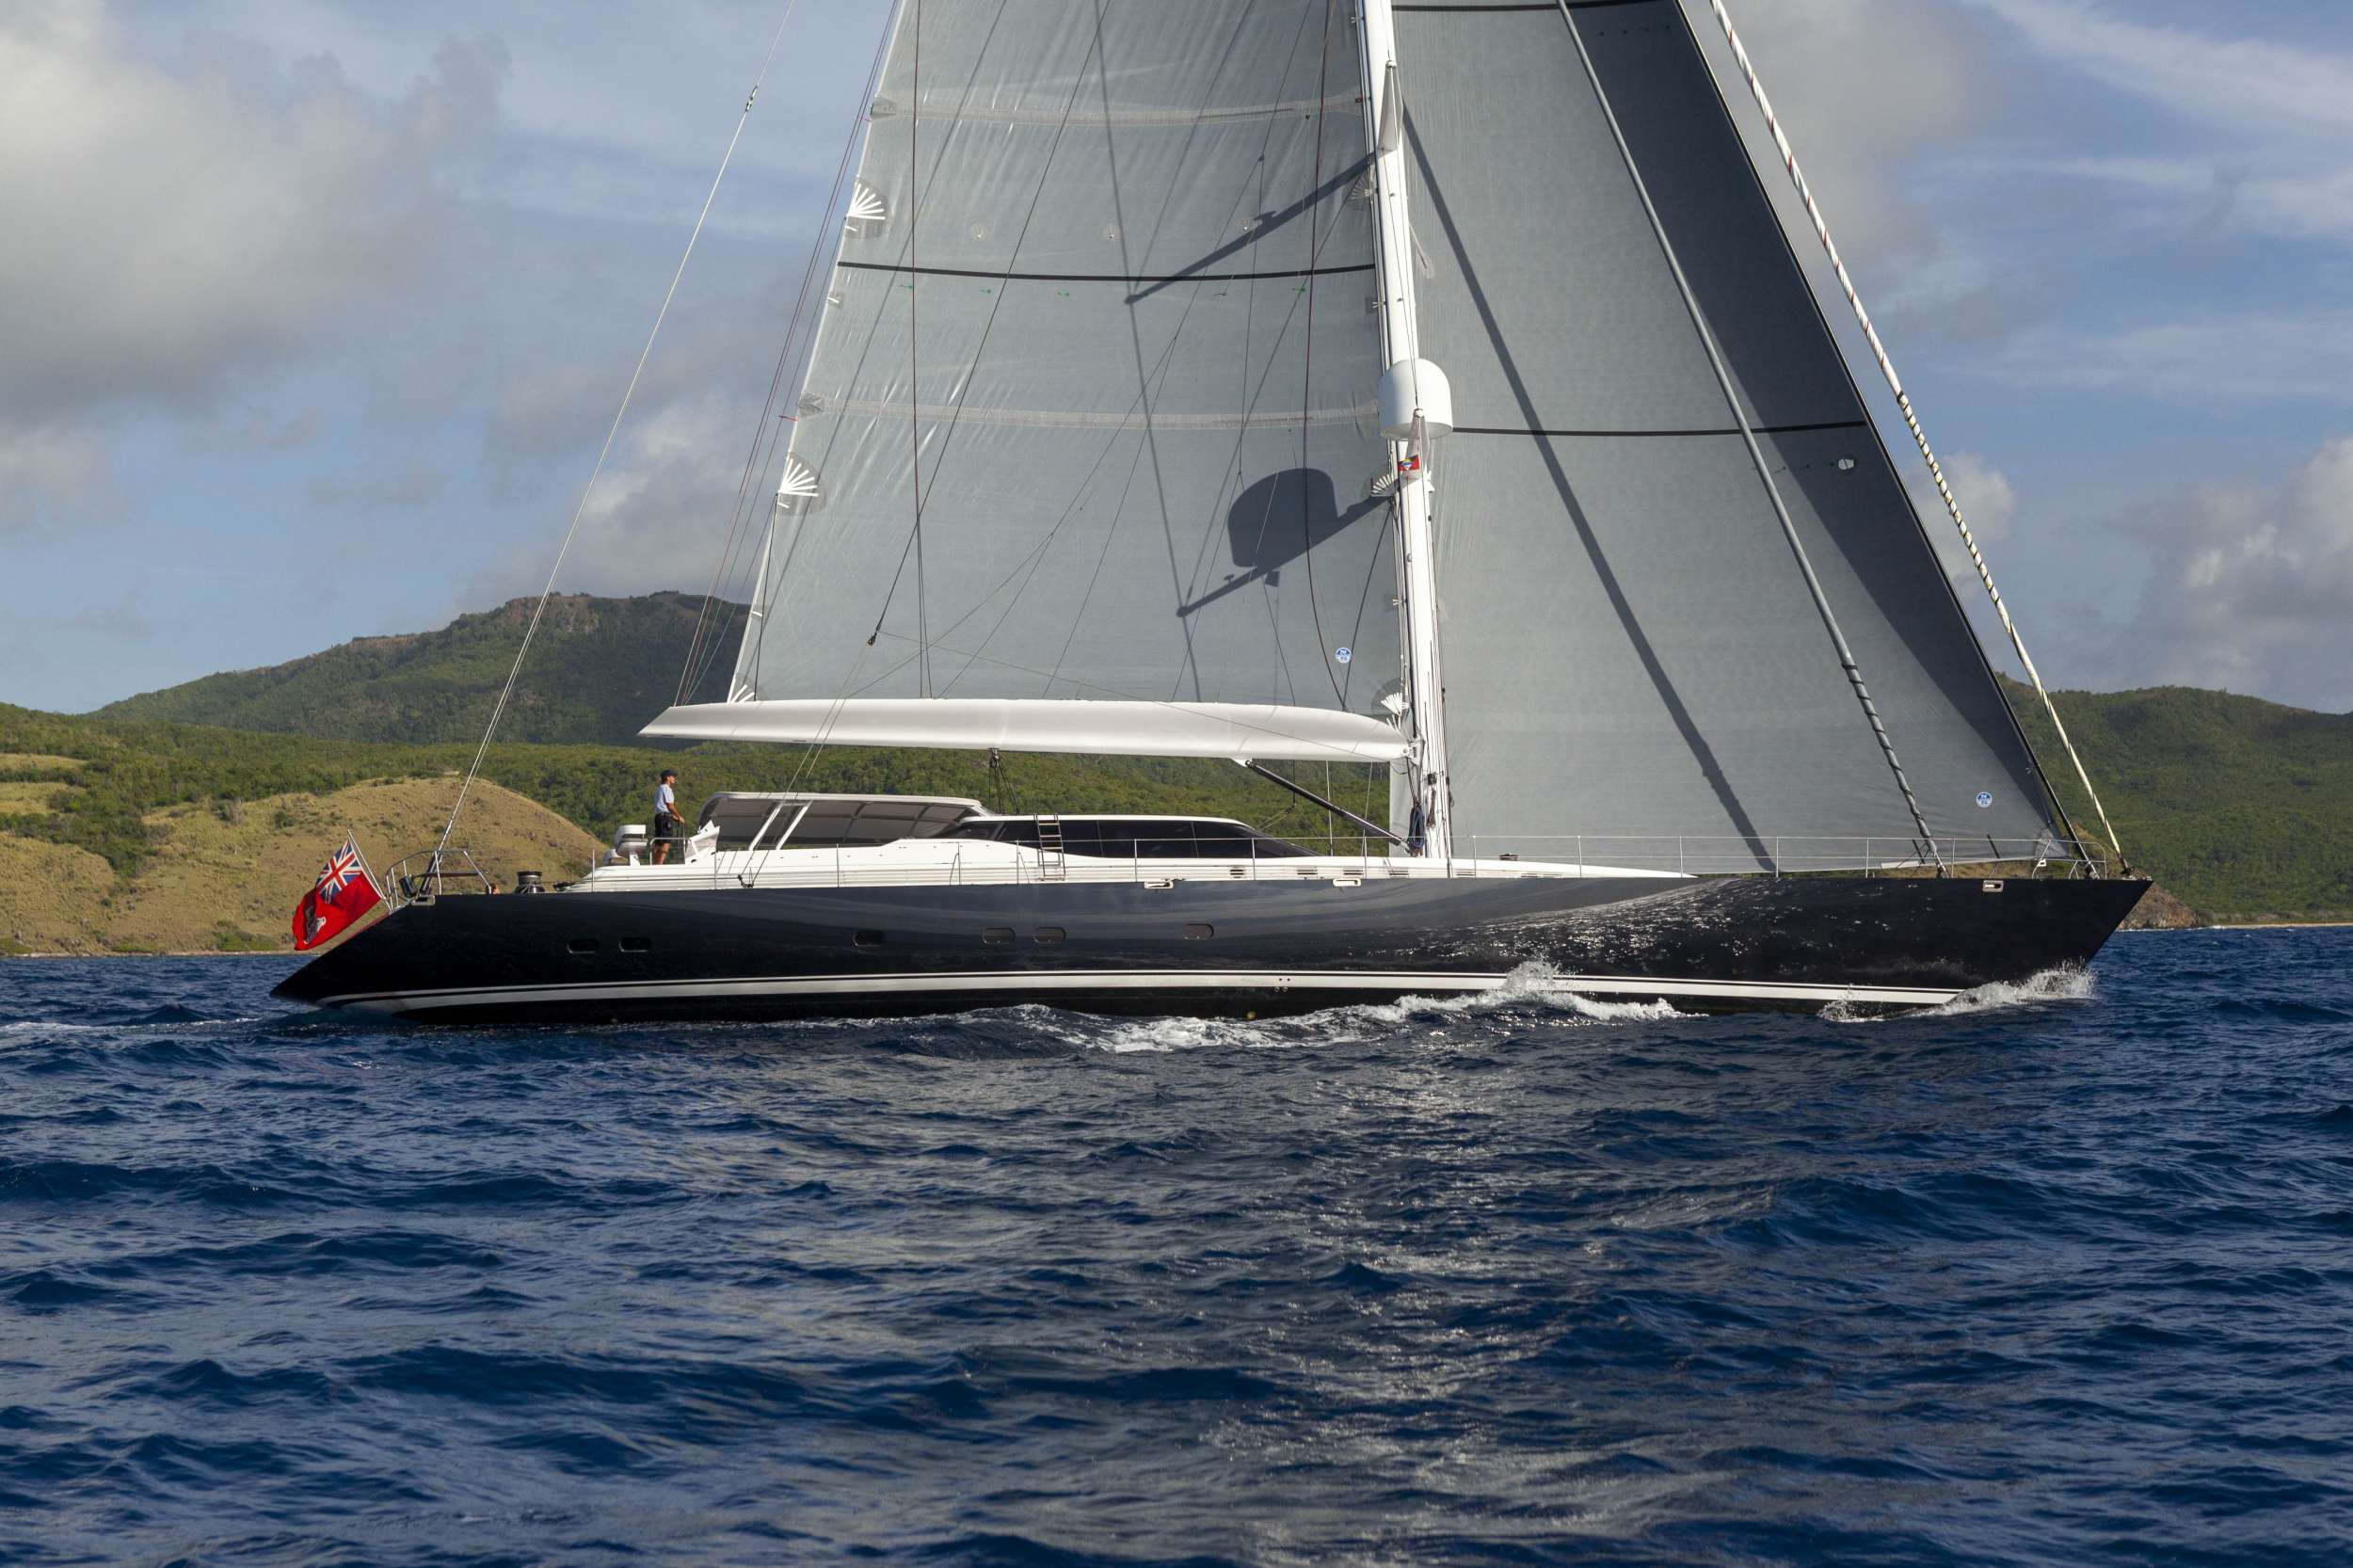 Built for world cruising: 1300 sq meters of sail area for 10+ knots under sail/ 11 knots under power